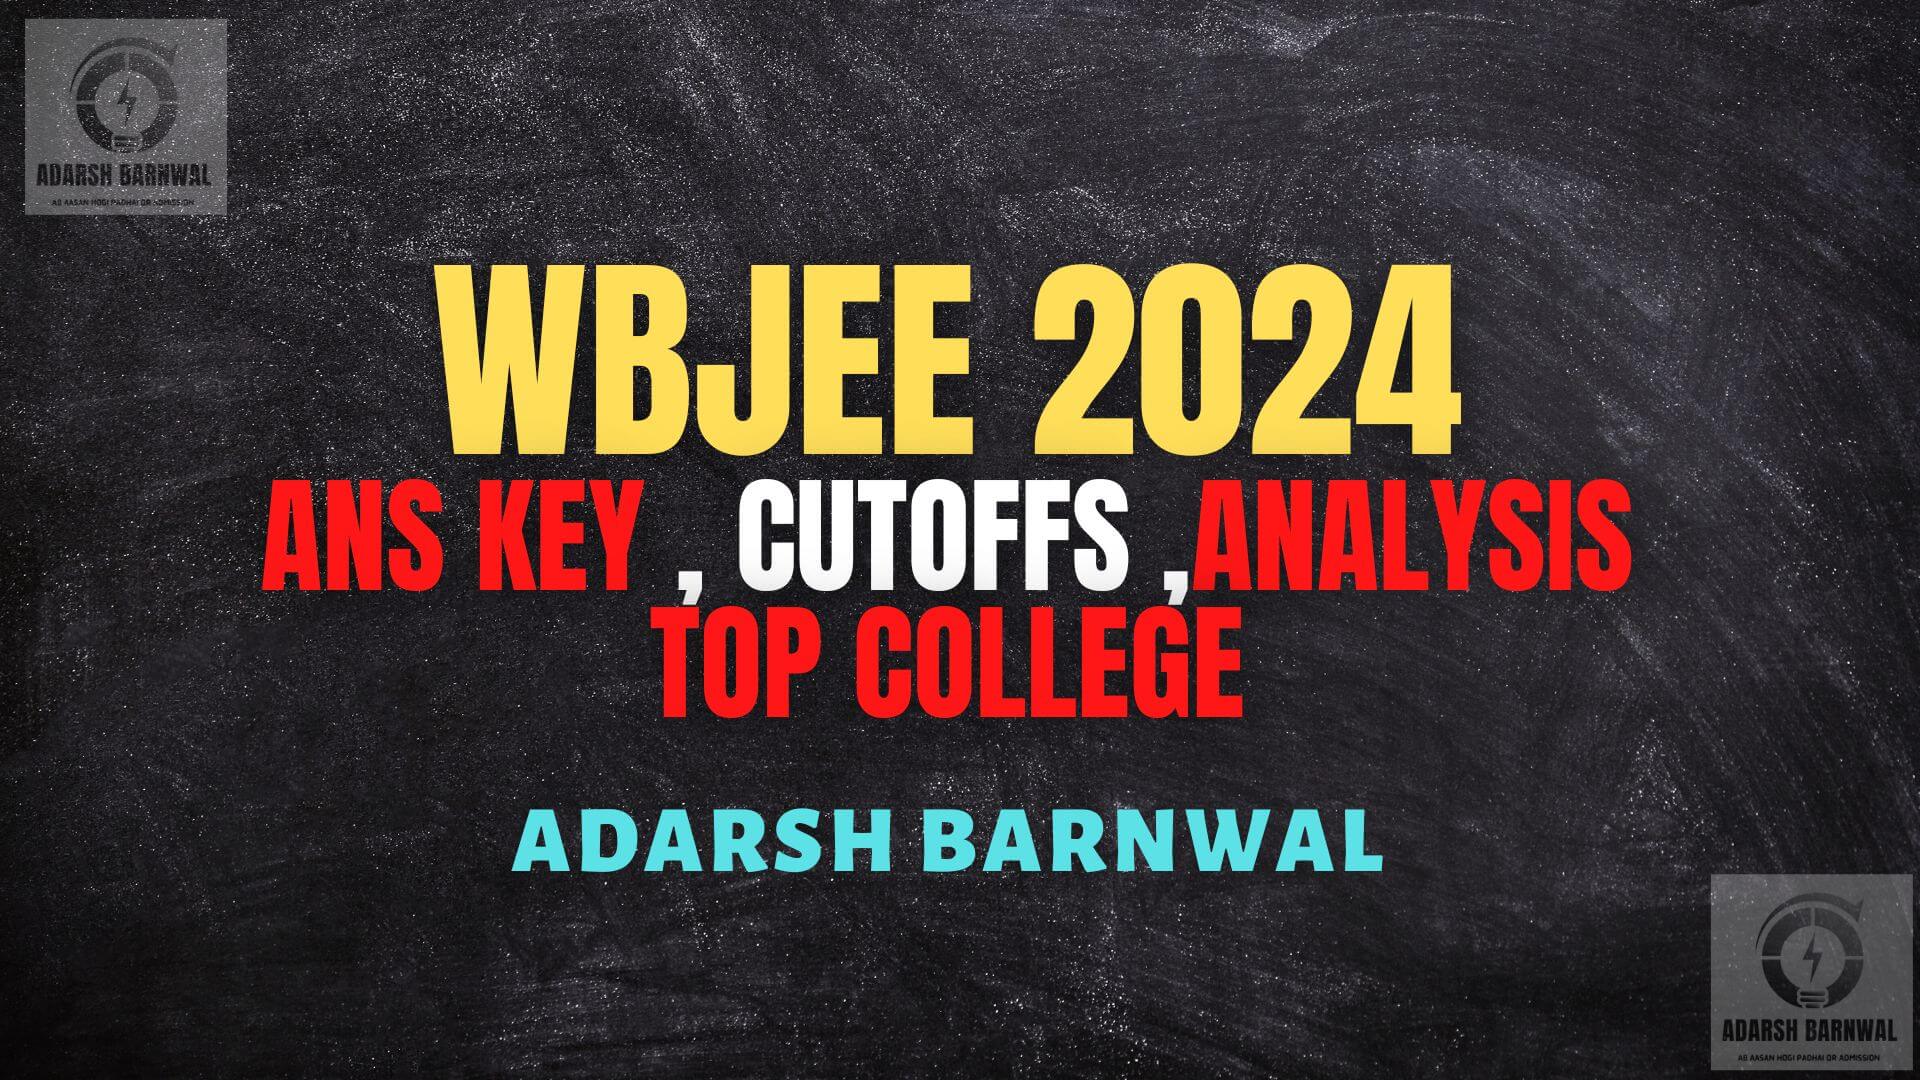 Wbjee 2024 Analysis , Answer Key , Question Paper , cutoff , Top College , Counselling & Result